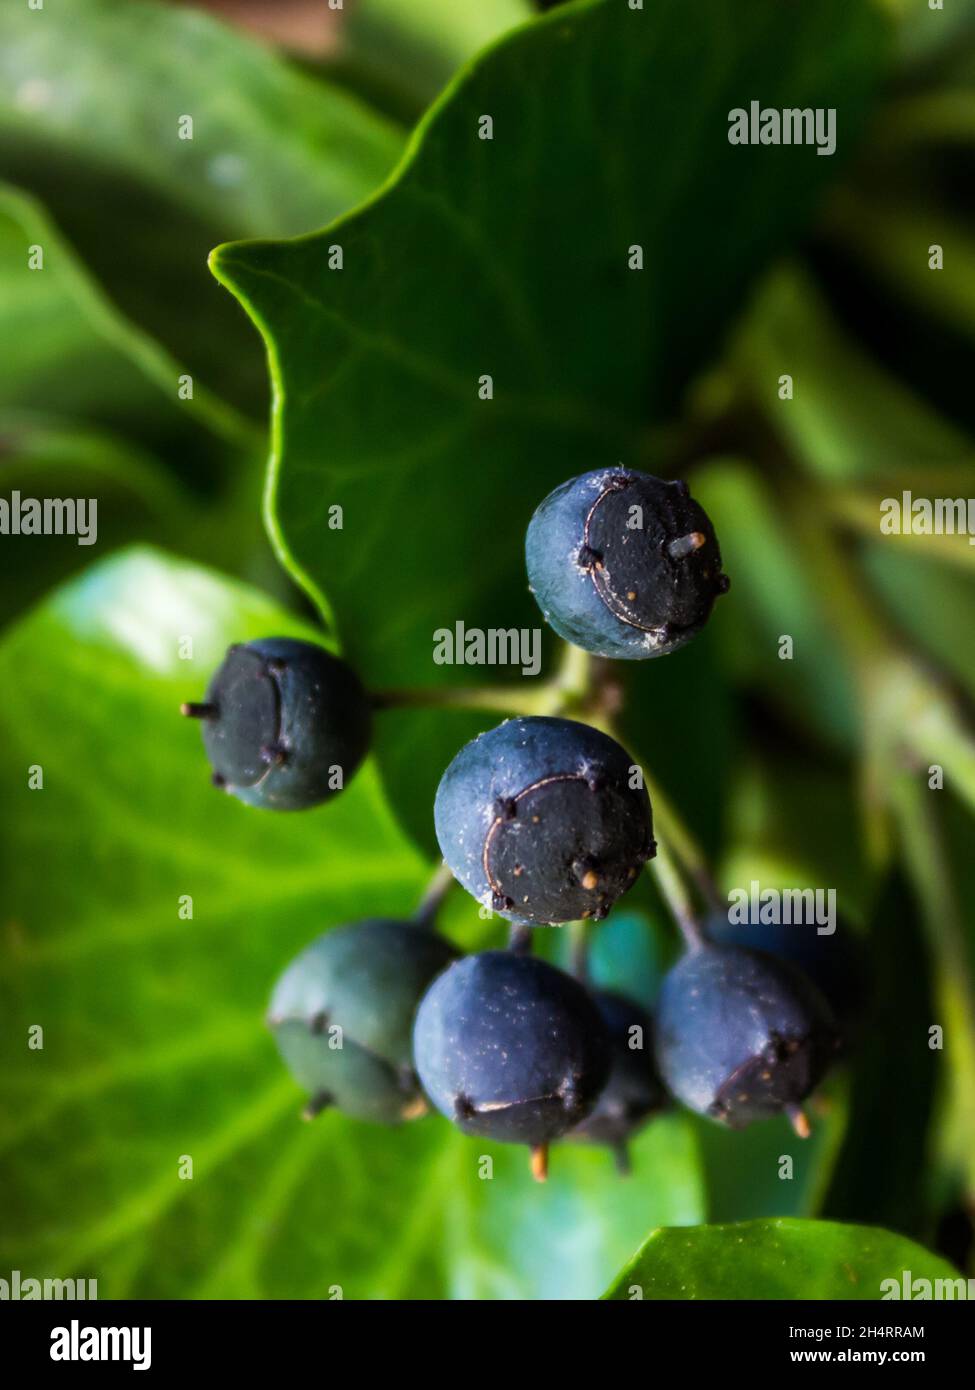 Close-up view of the blueish-black berries of an Ivy Vine, Hedera Hibernica Stock Photo